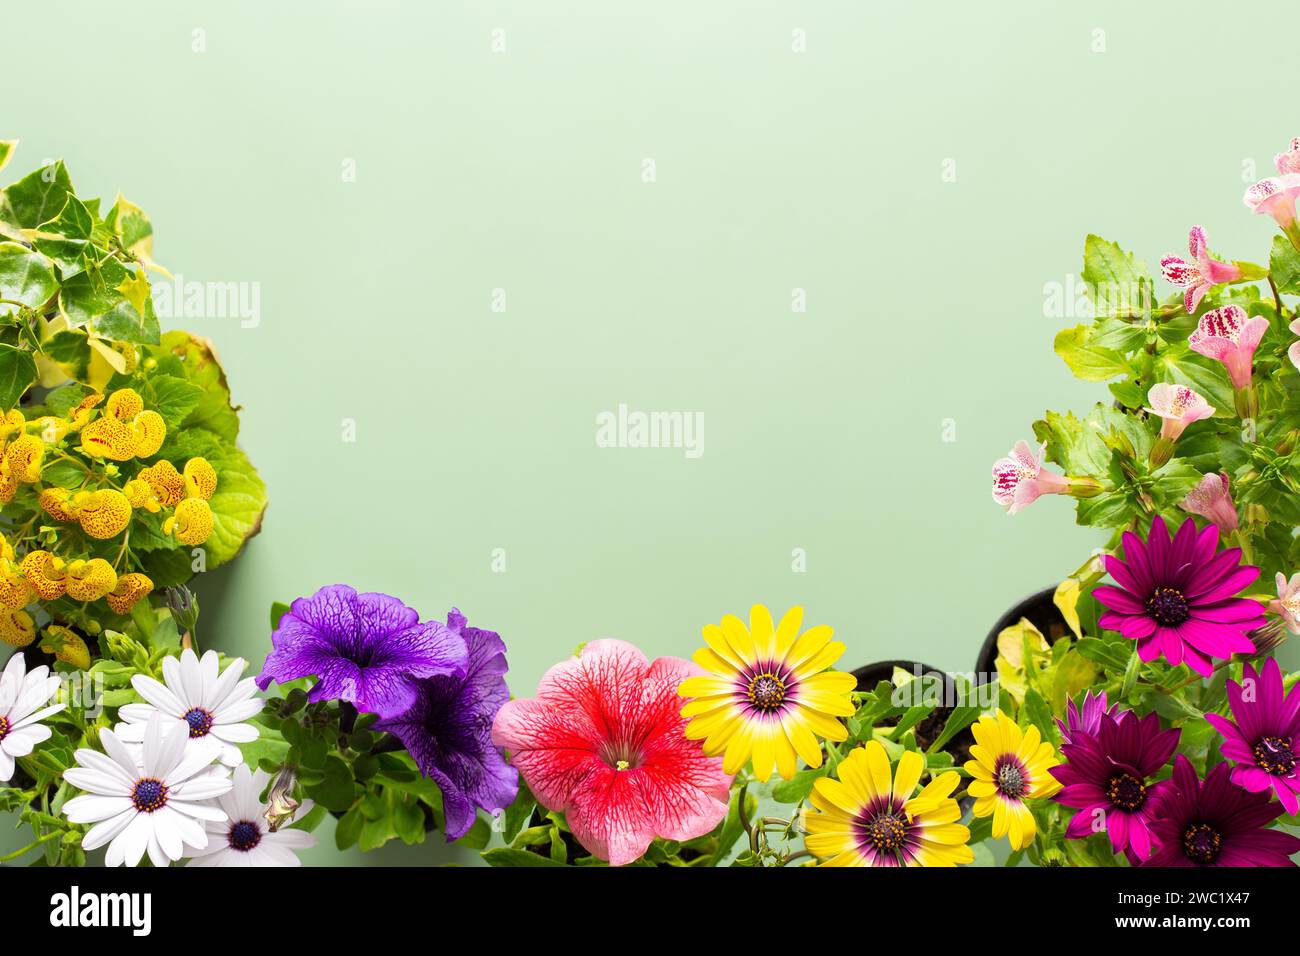 Spring decoration of a home balcony or terrace with flowers, Osteospermum and Calceolaria, Mimulus and Petunia on a green background, home gardening a Stock Photo